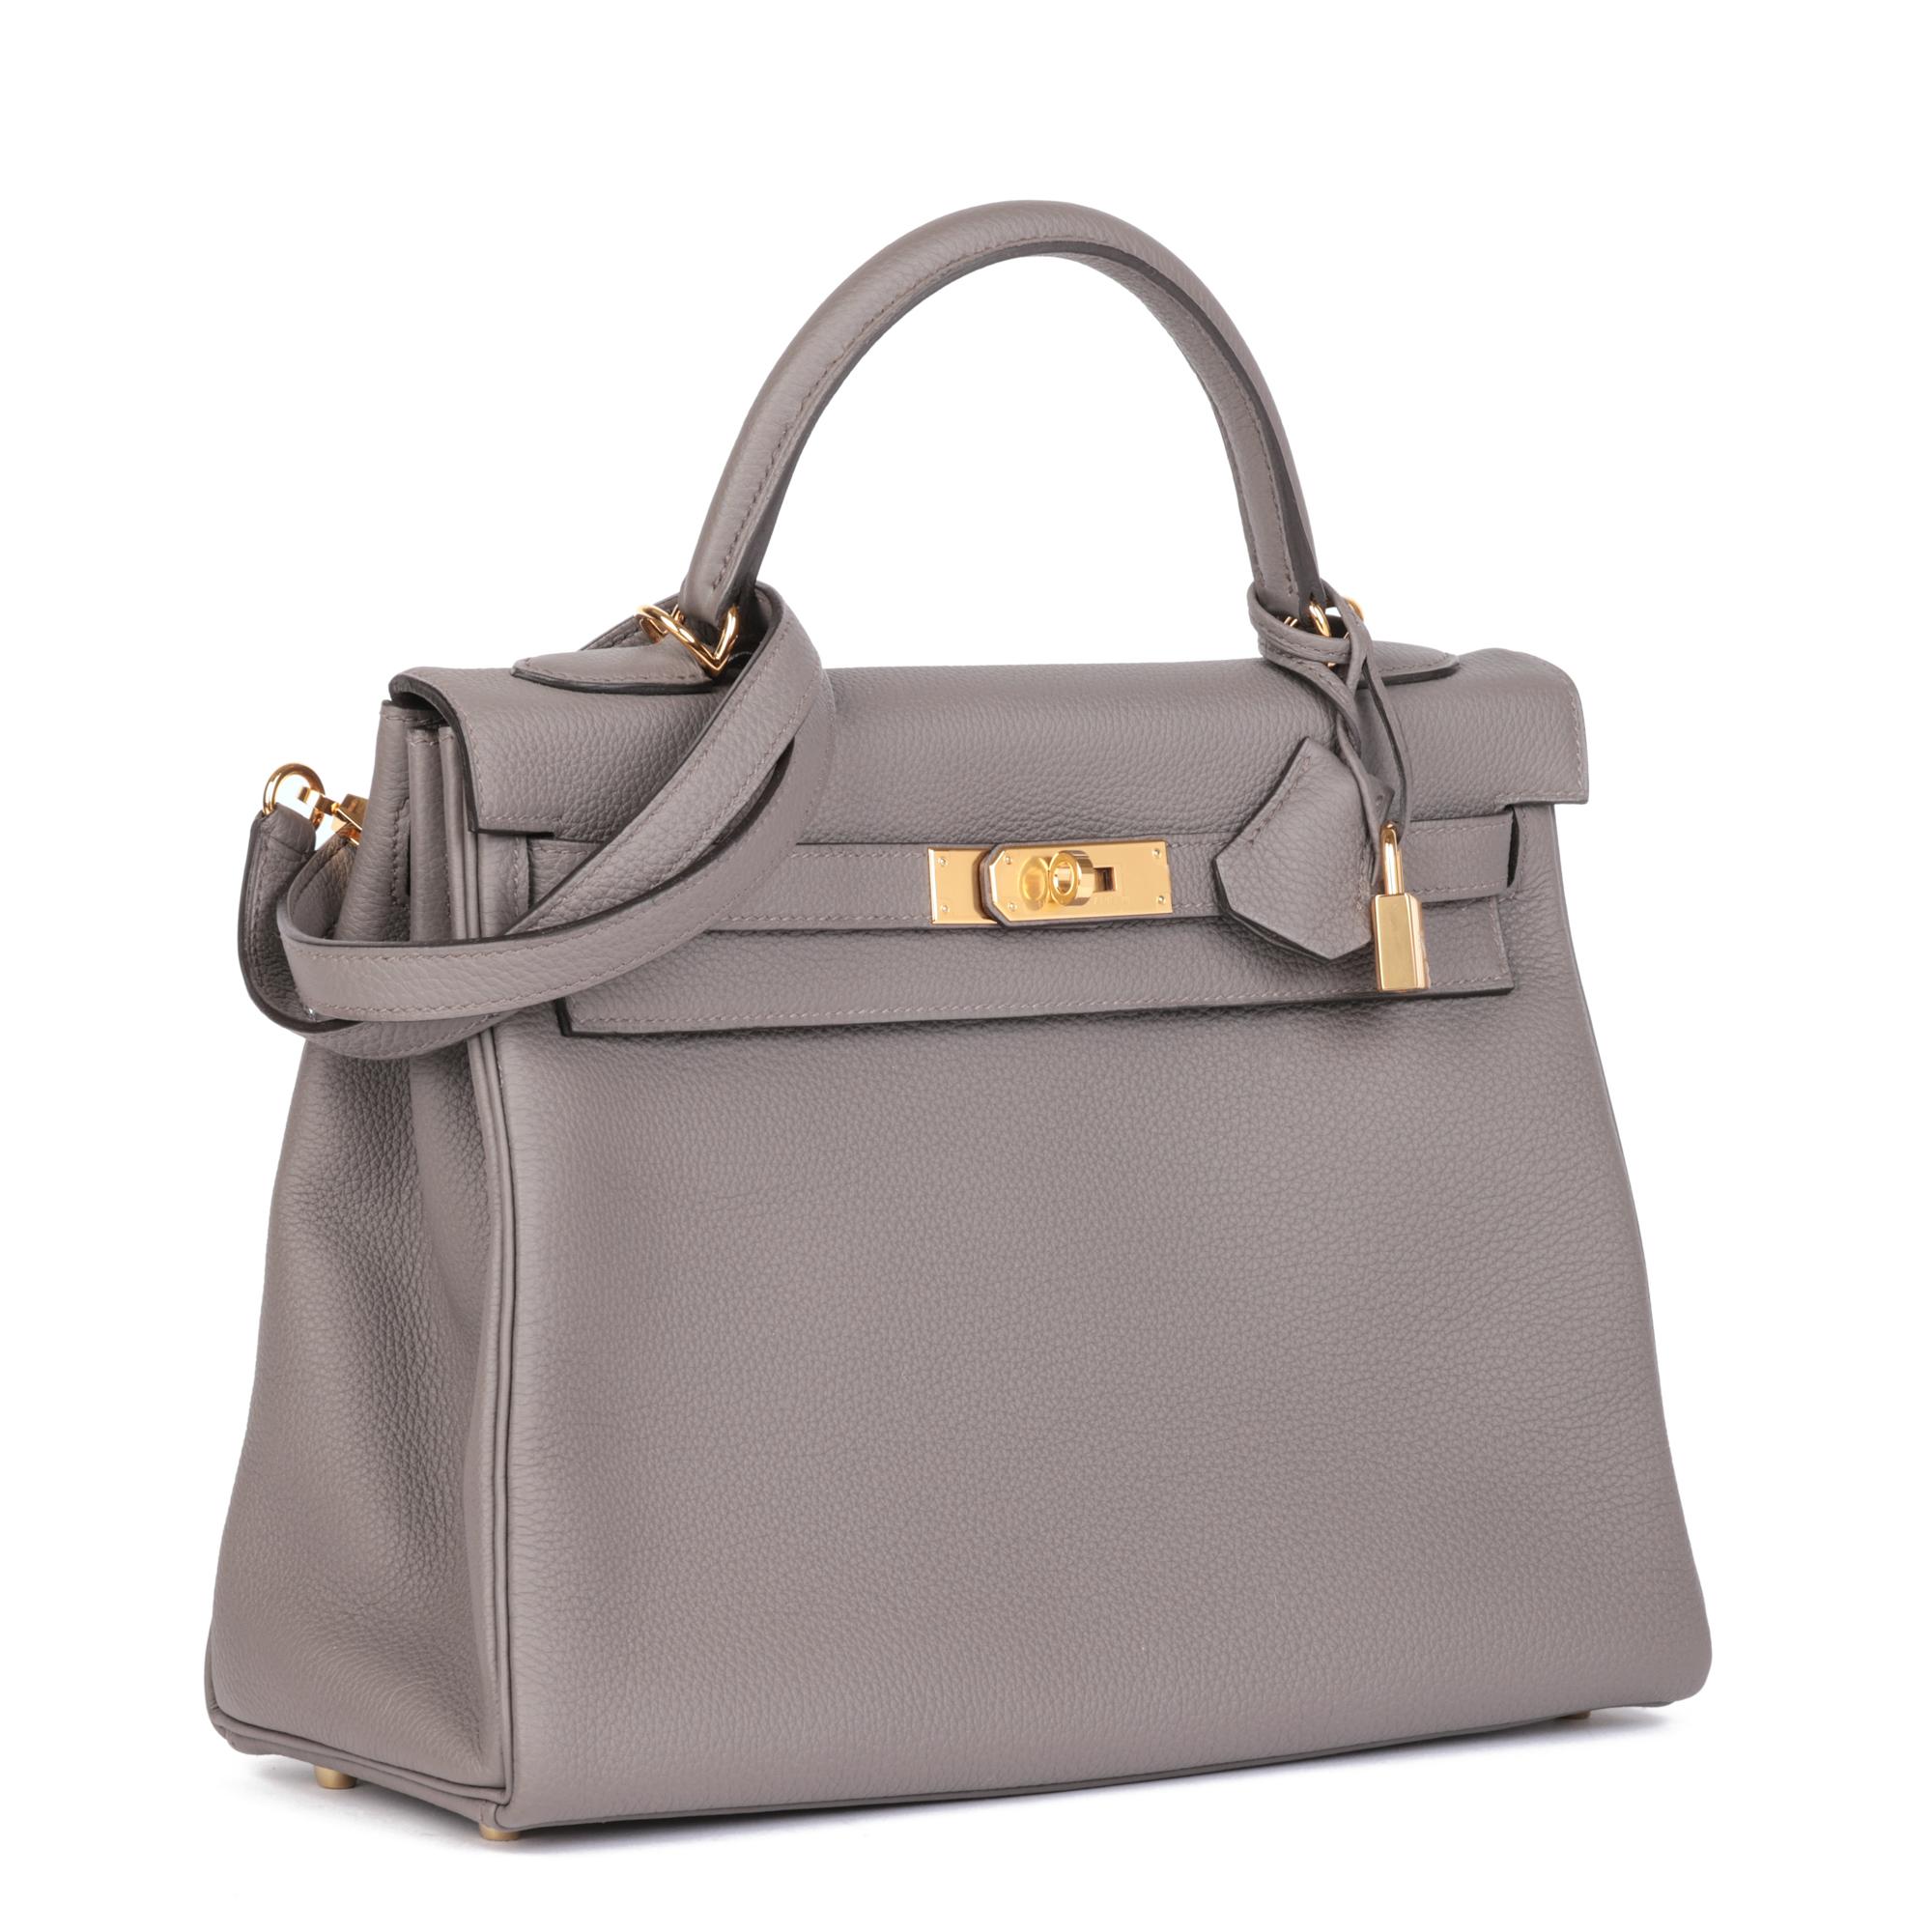 Hermès Etain Togo Leather Kelly 32cm Retourne

CONDITION NOTES
This item is in unworn condition.

BRAND	Hermès
MODEL	Kelly 32cm
AGE	2019
GENDER	Women's
MATERIAL(S)	Togo Leather
COLOUR	Grey
BRAND COLOUR	Etain
HARDWARE	Gold
INTERIOR	Grey